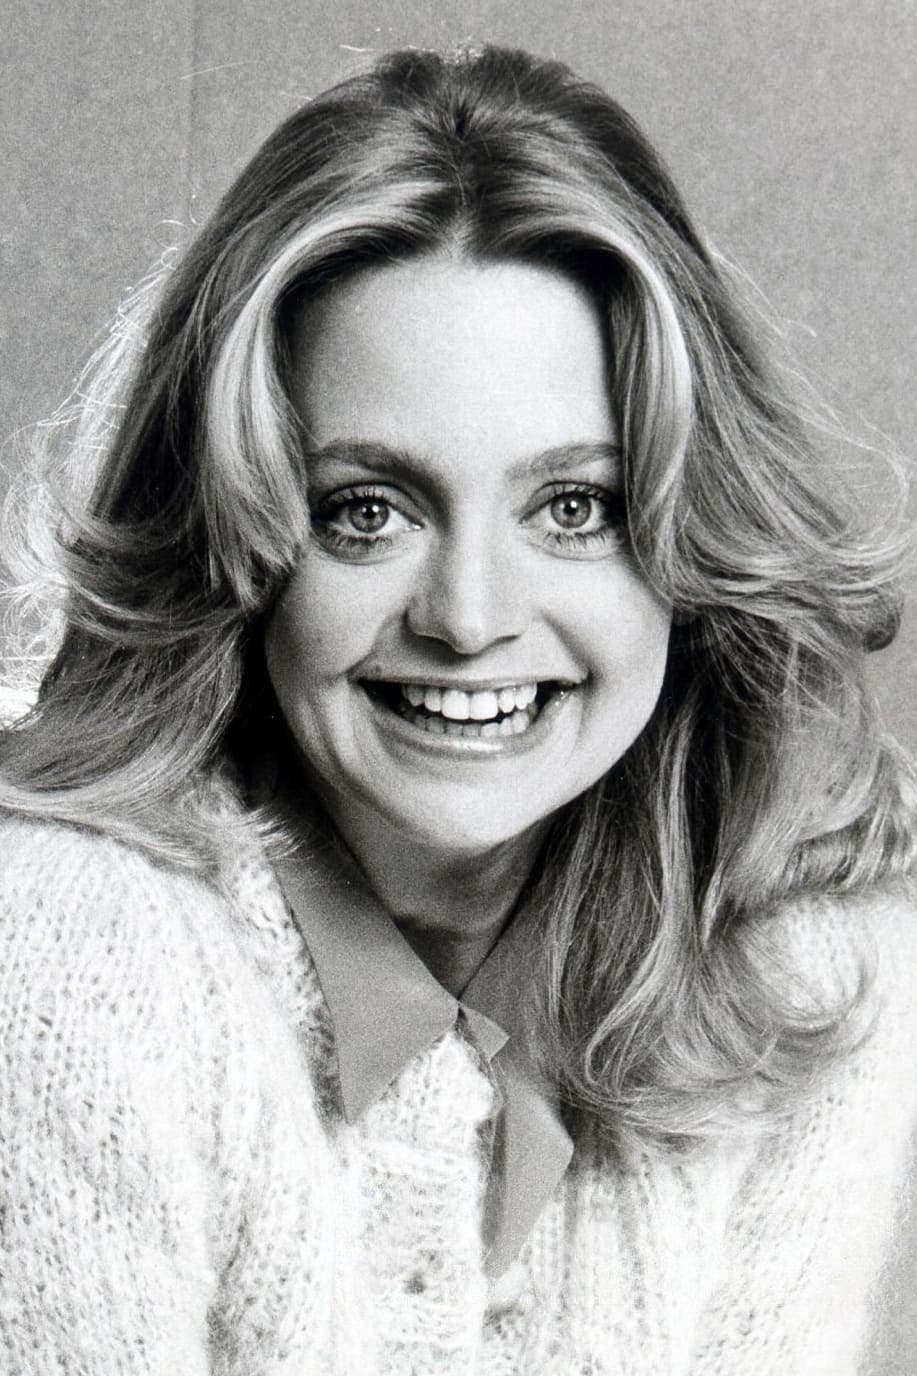 Goldie Hawn | Toni Simmons